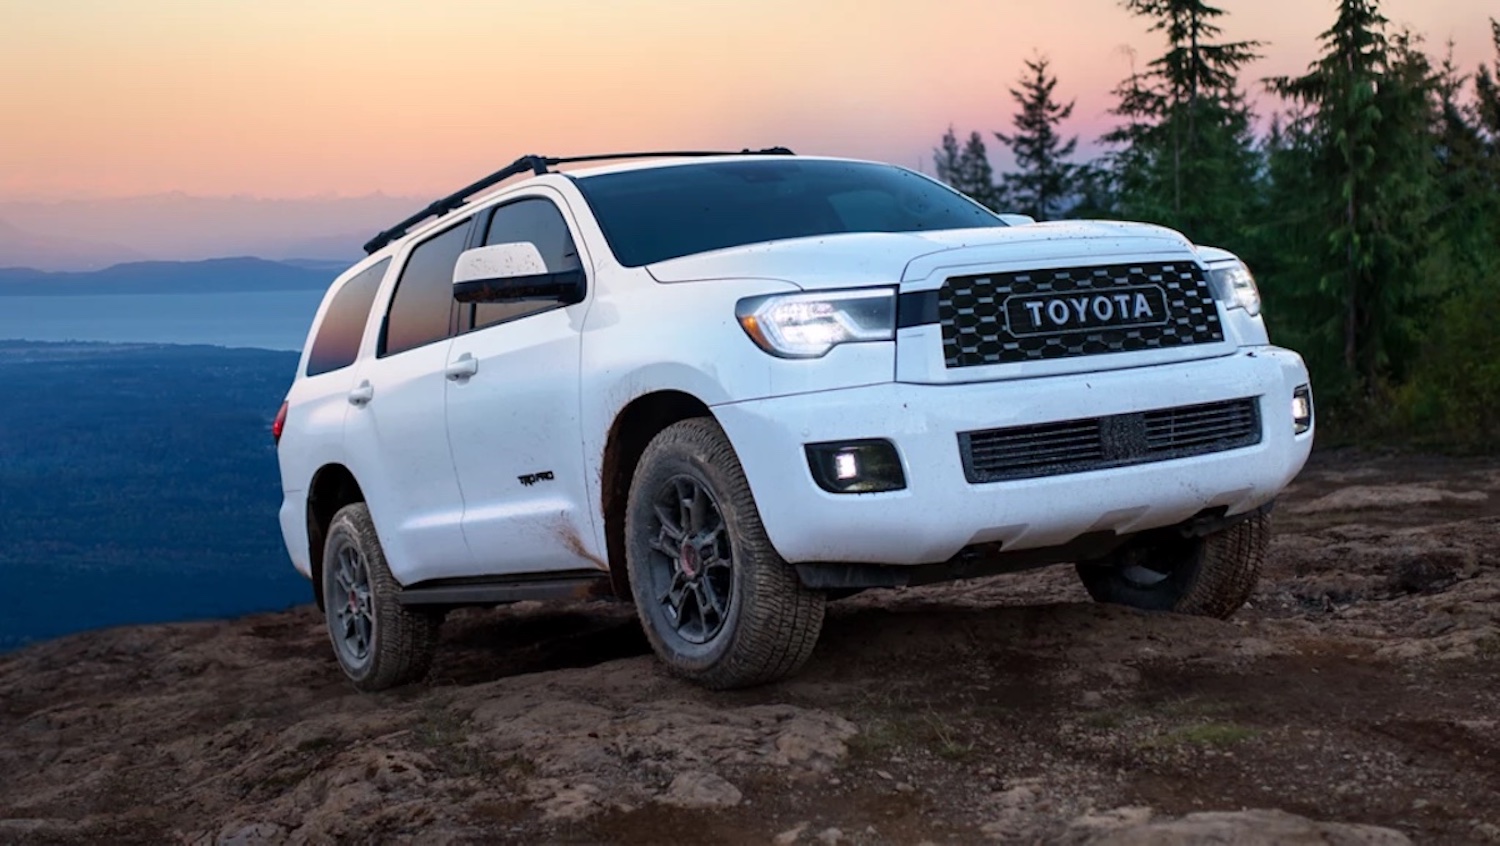 White 2022 Toyota Sequoia SUV photographed atop a mountain, trees visible in the background.